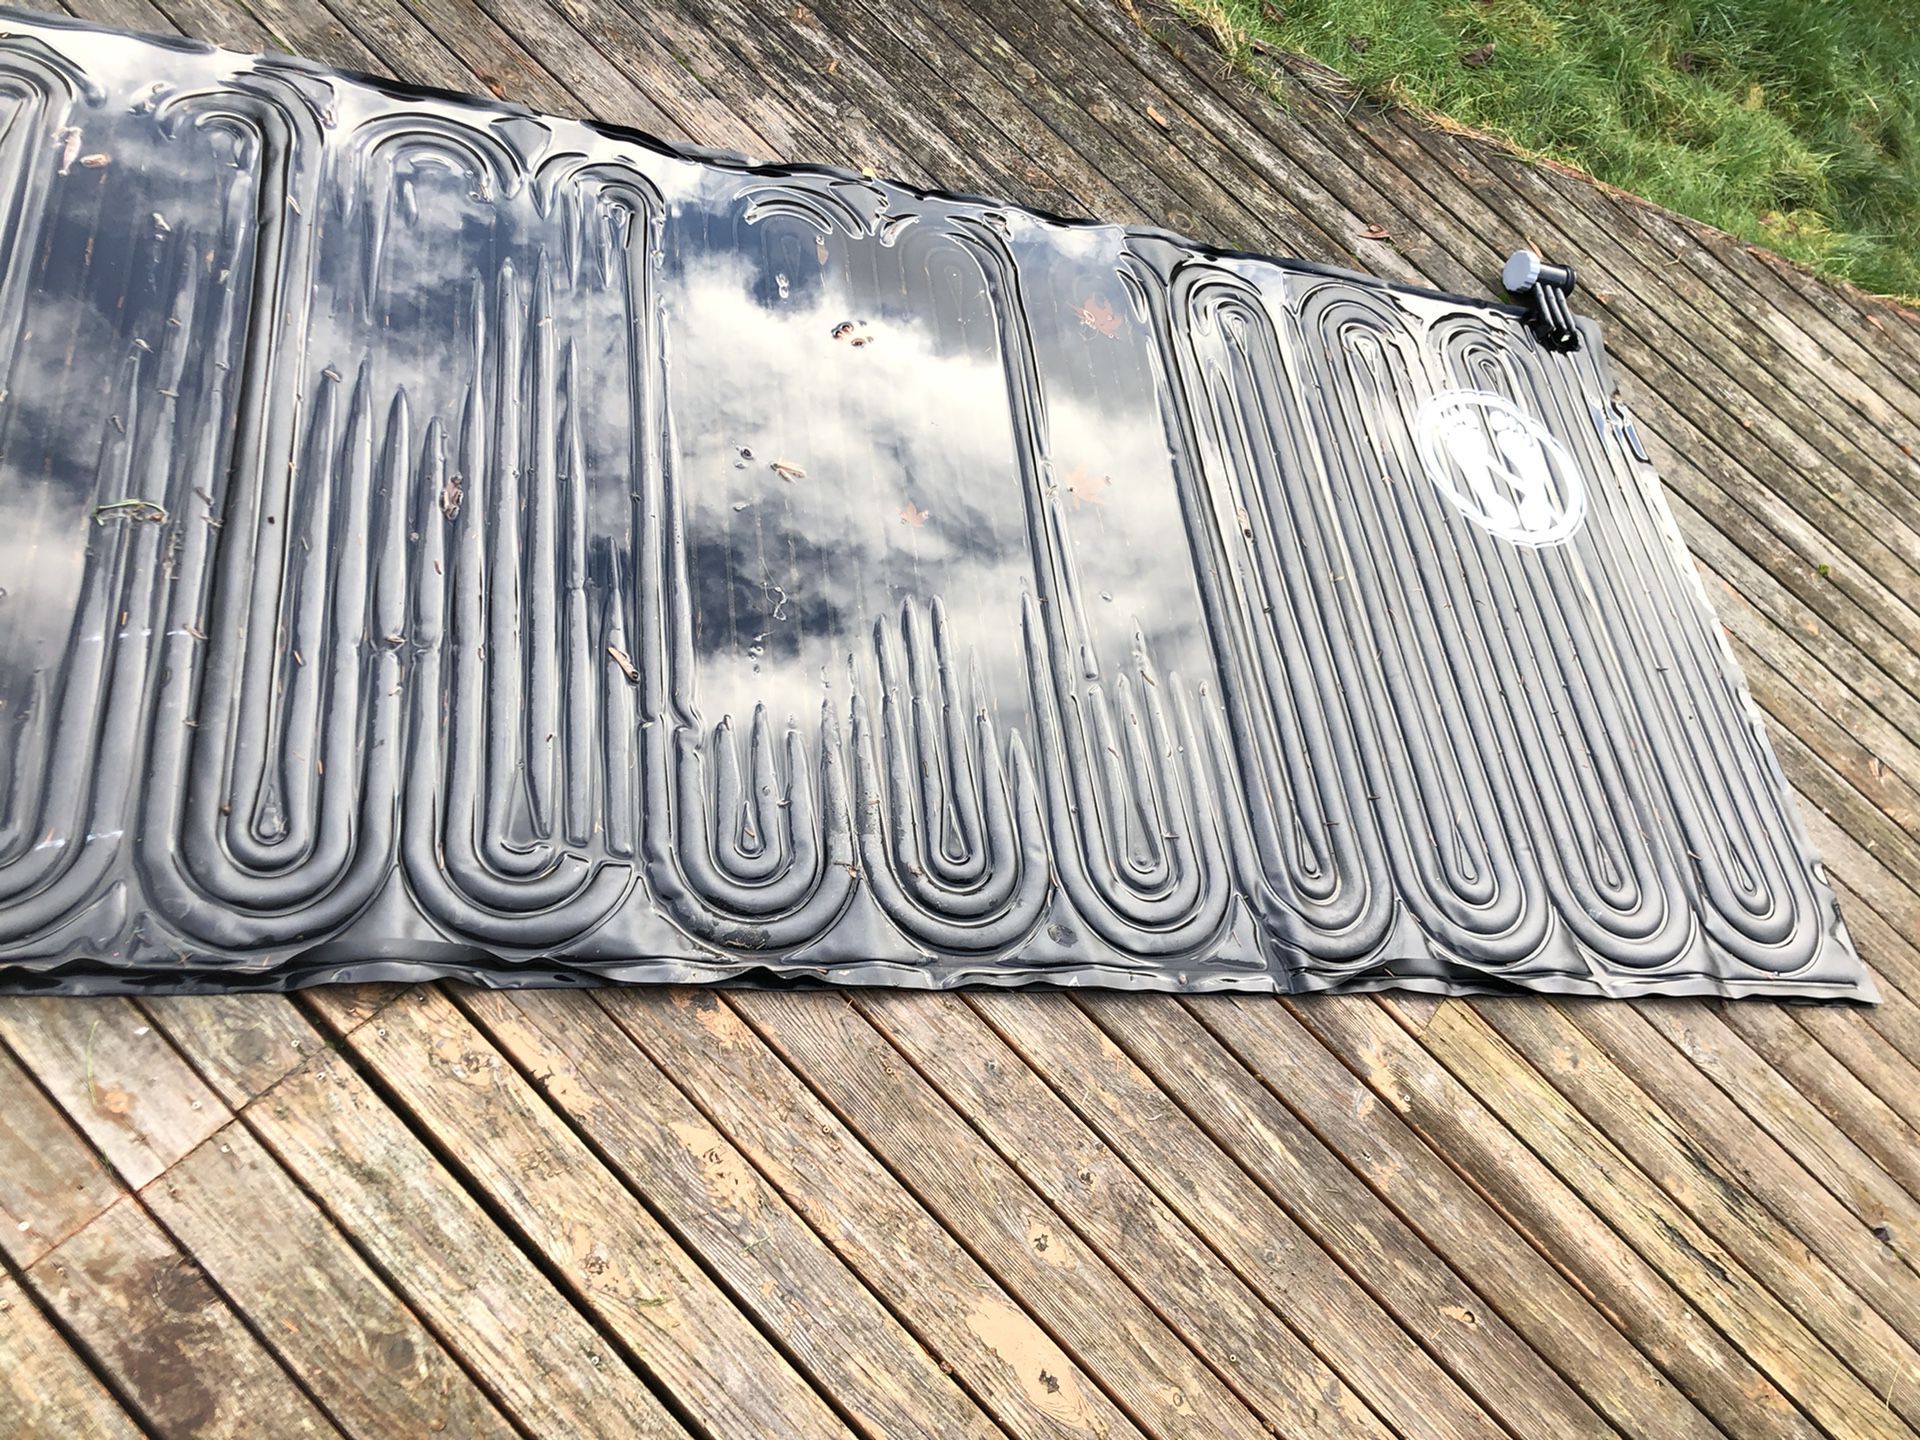 Solar Heater for Bestway Oval Pool from Costco